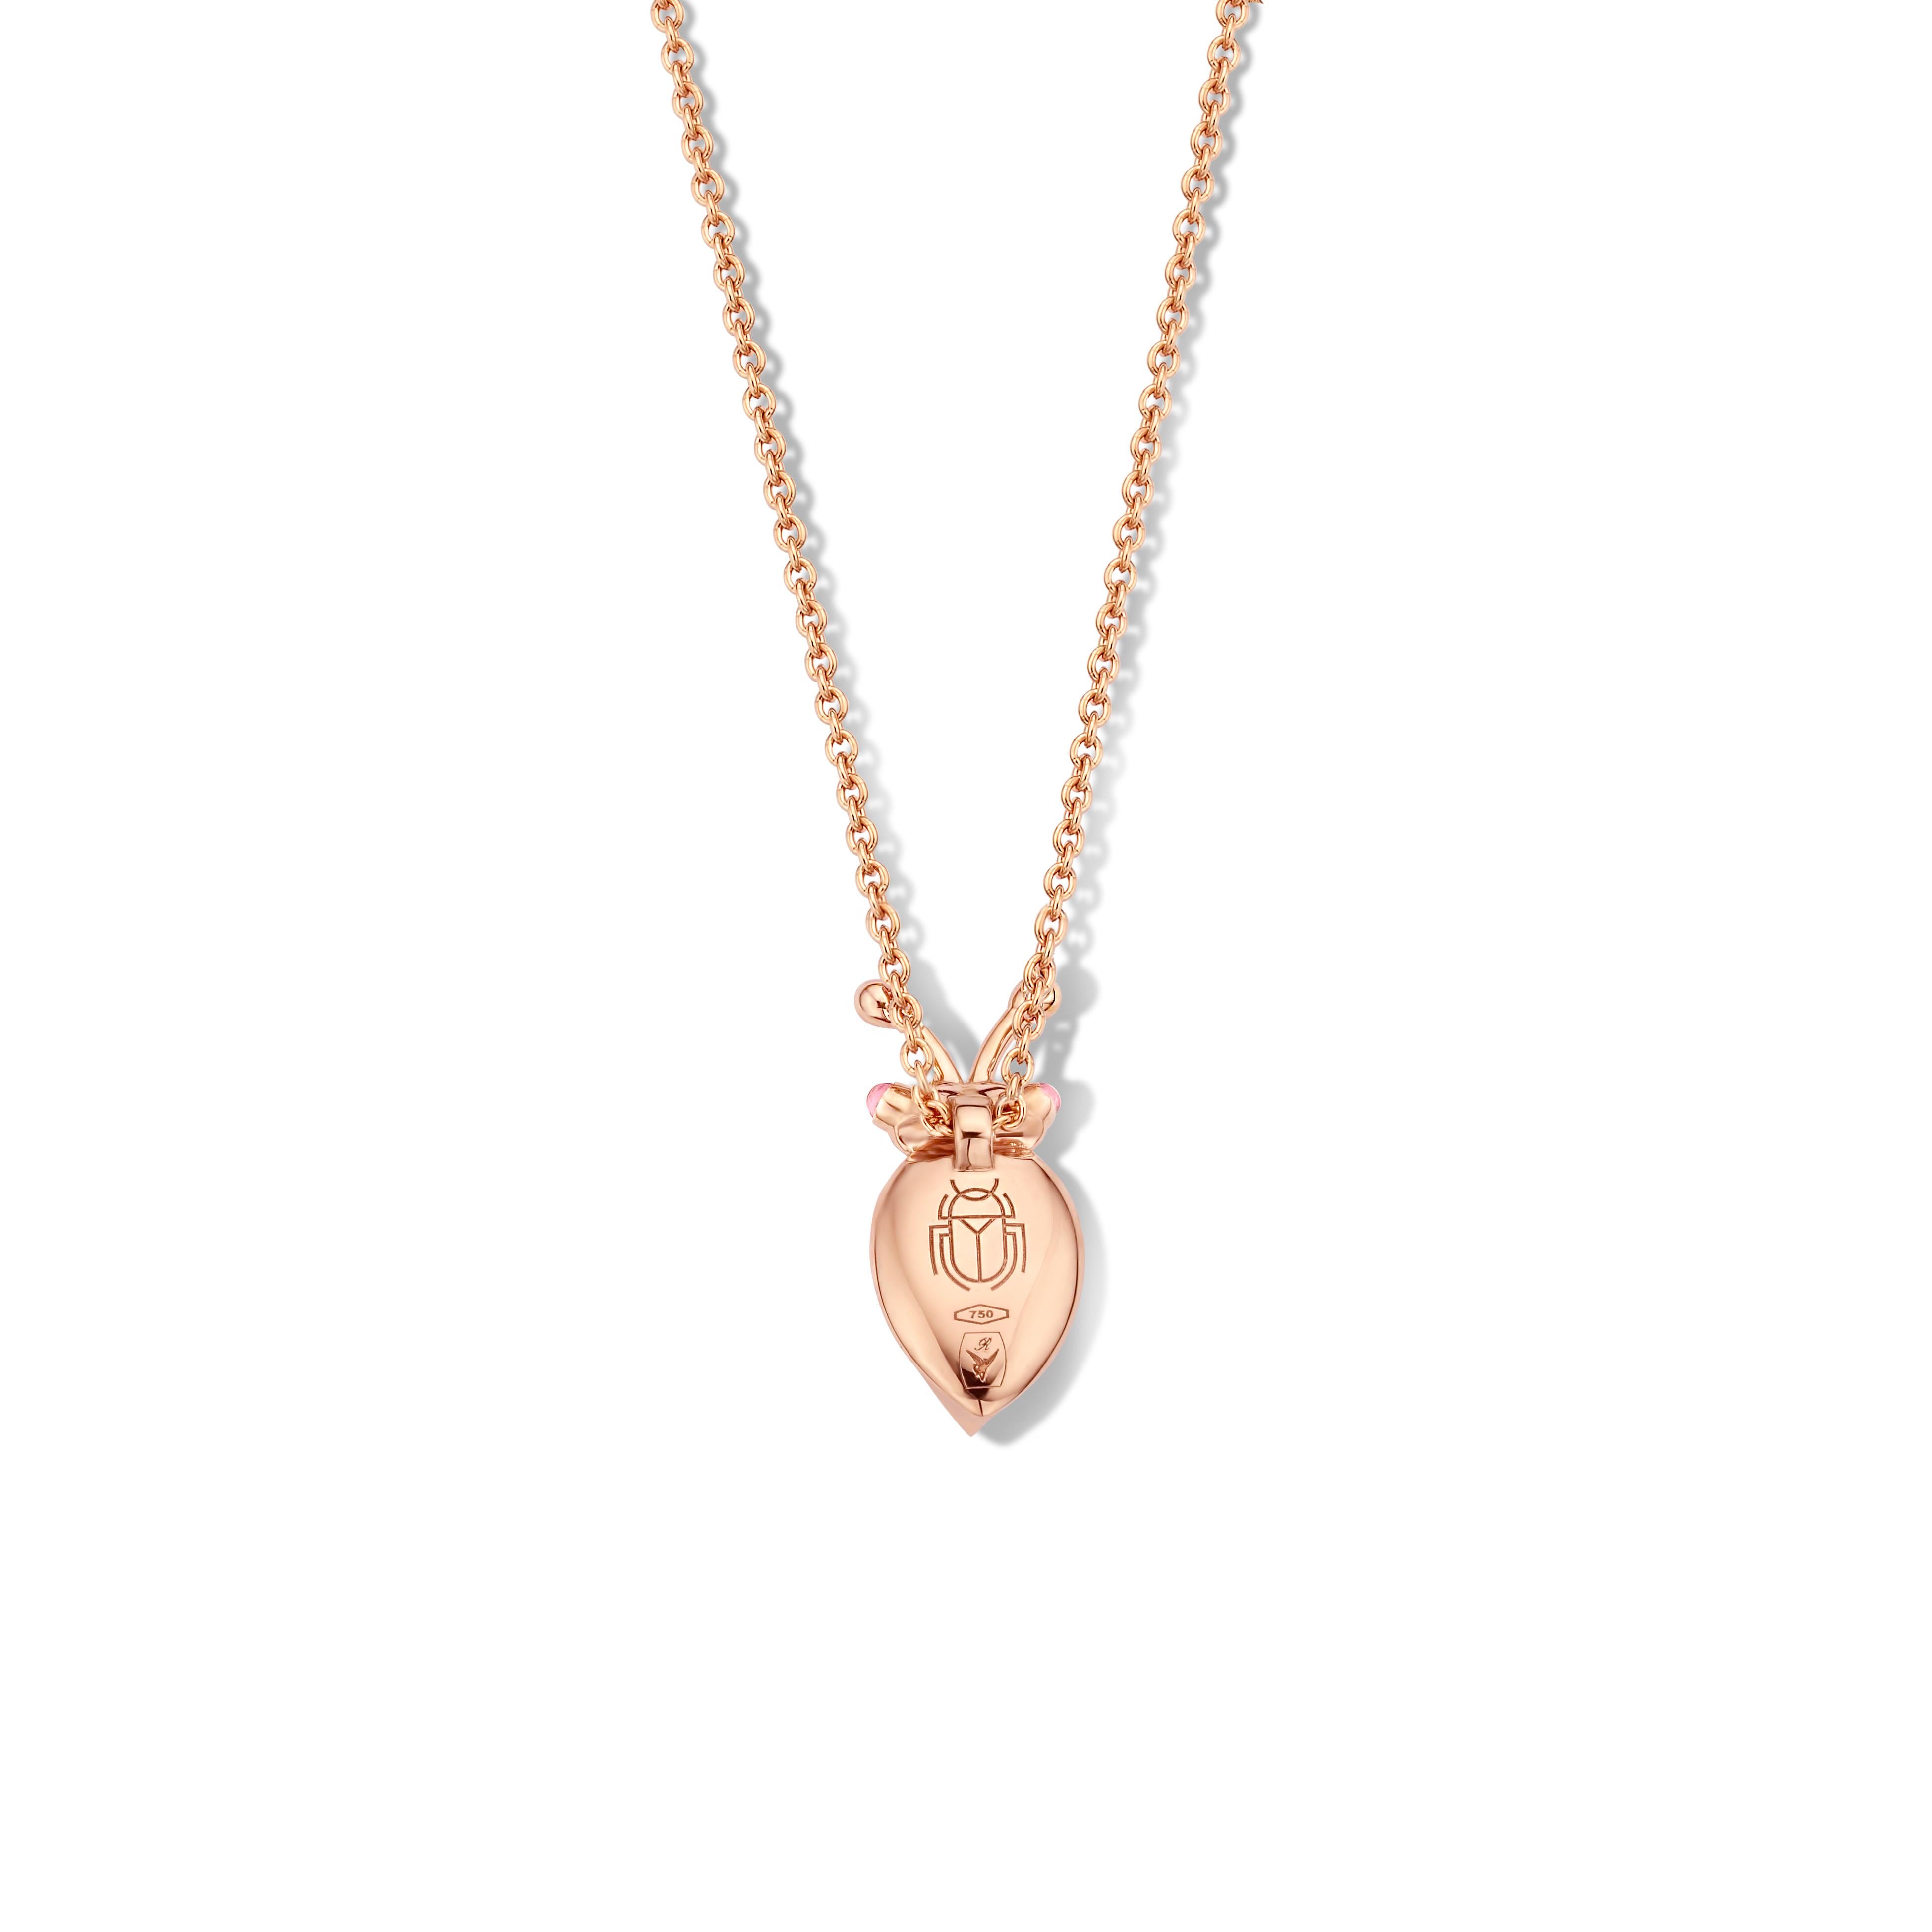 One-of-a-kind lucky beetle necklace in 18-Karat rose gold 6g created by jewelry designer Celine Roelens. 

This necklace is set with one natural, vivid pink tourmaline in pear cabochon cut and 0.04Ct of the finest brilliant cut diamonds in VVS/DEF